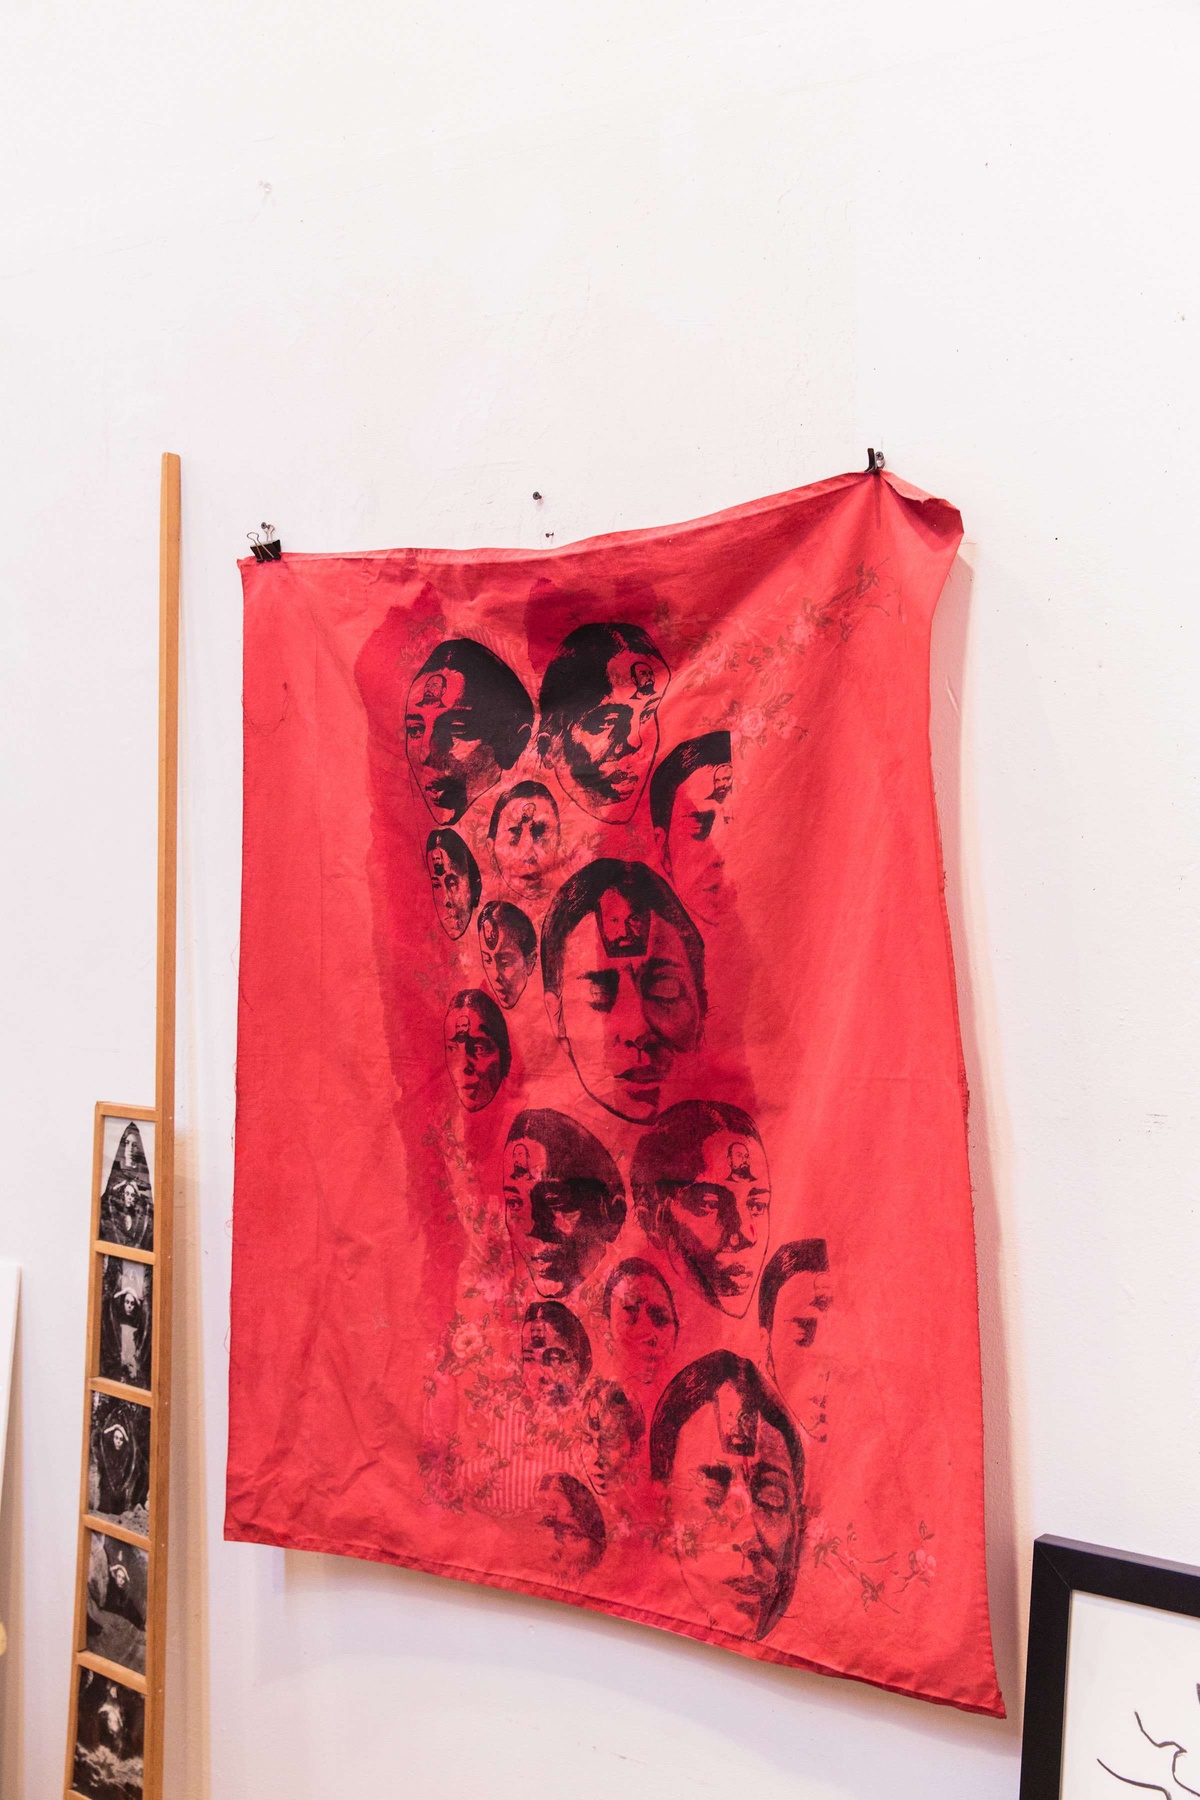 A red silk print of Ana Mendieta made by Mary Beth Edelson hangs on a white wall.